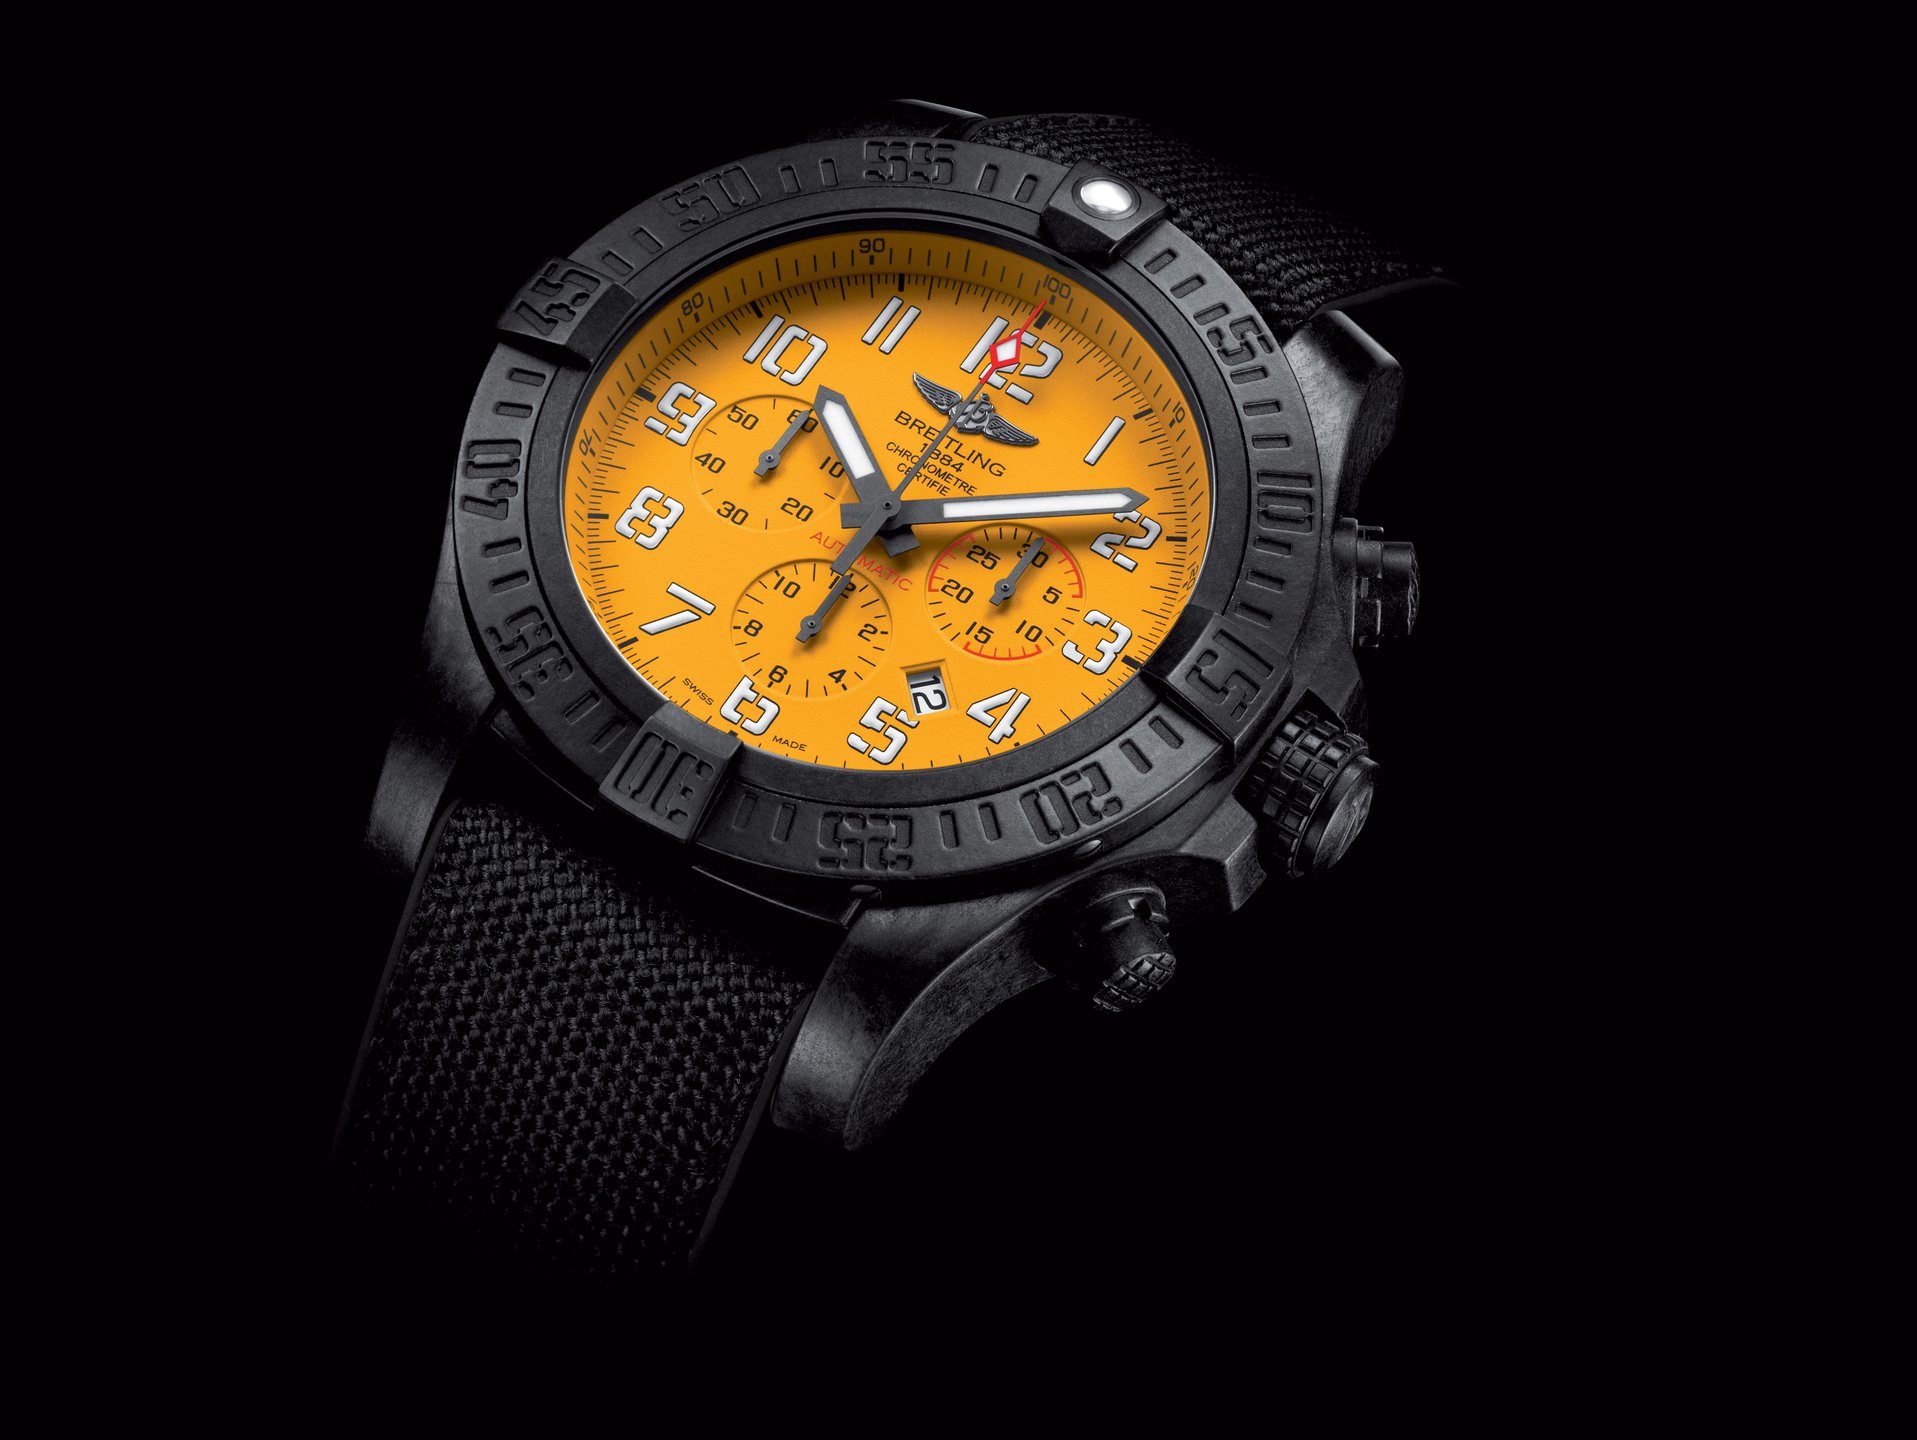 Breitling timing 44 onboard AB01154G/BD13breitling Timing 44 onboard AB01154G/BD13/101W